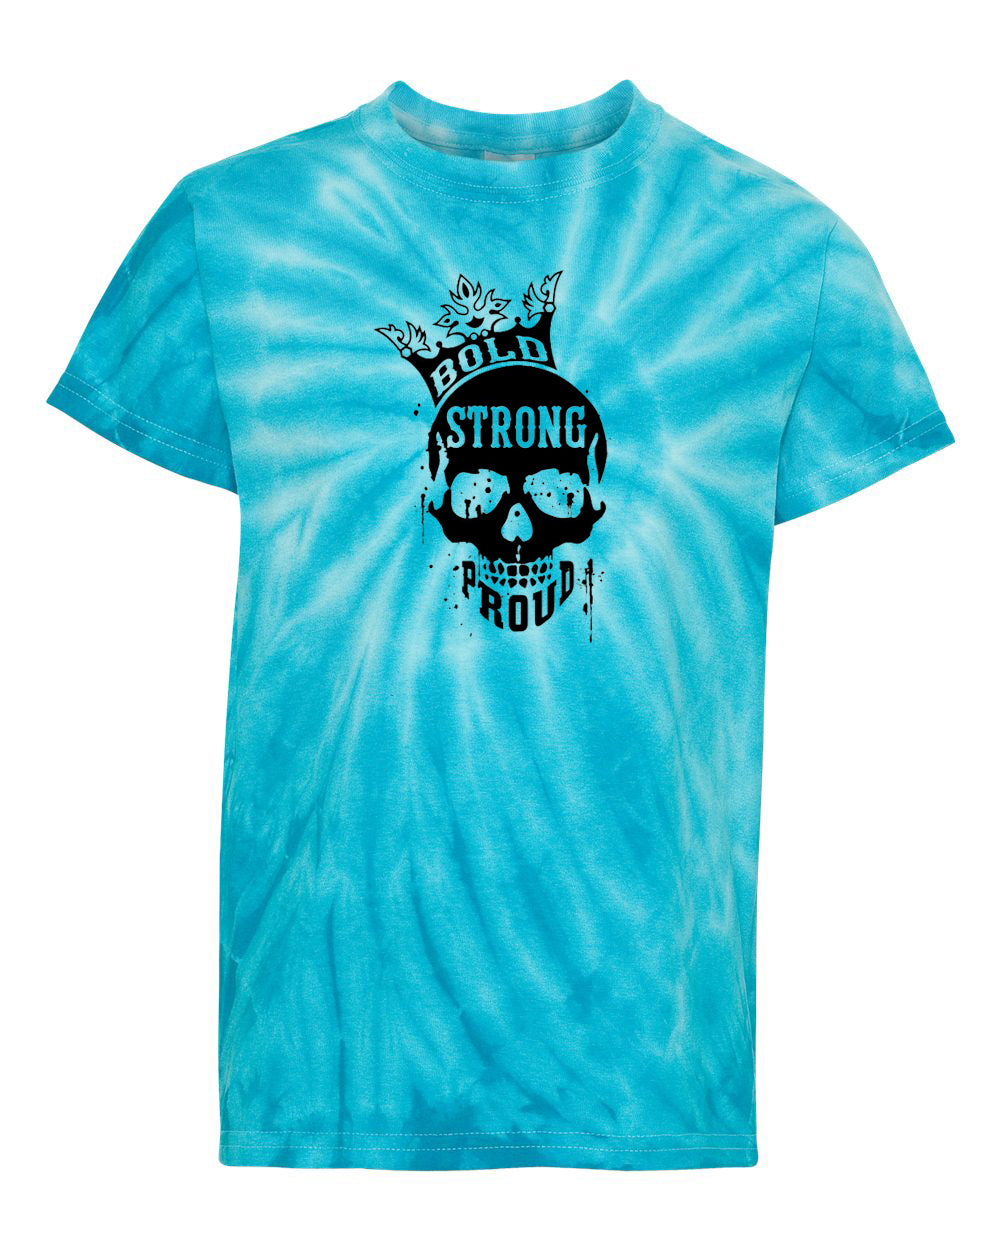 Bold Strong Proud Youth Tie Dye T-Shirt Turquoise